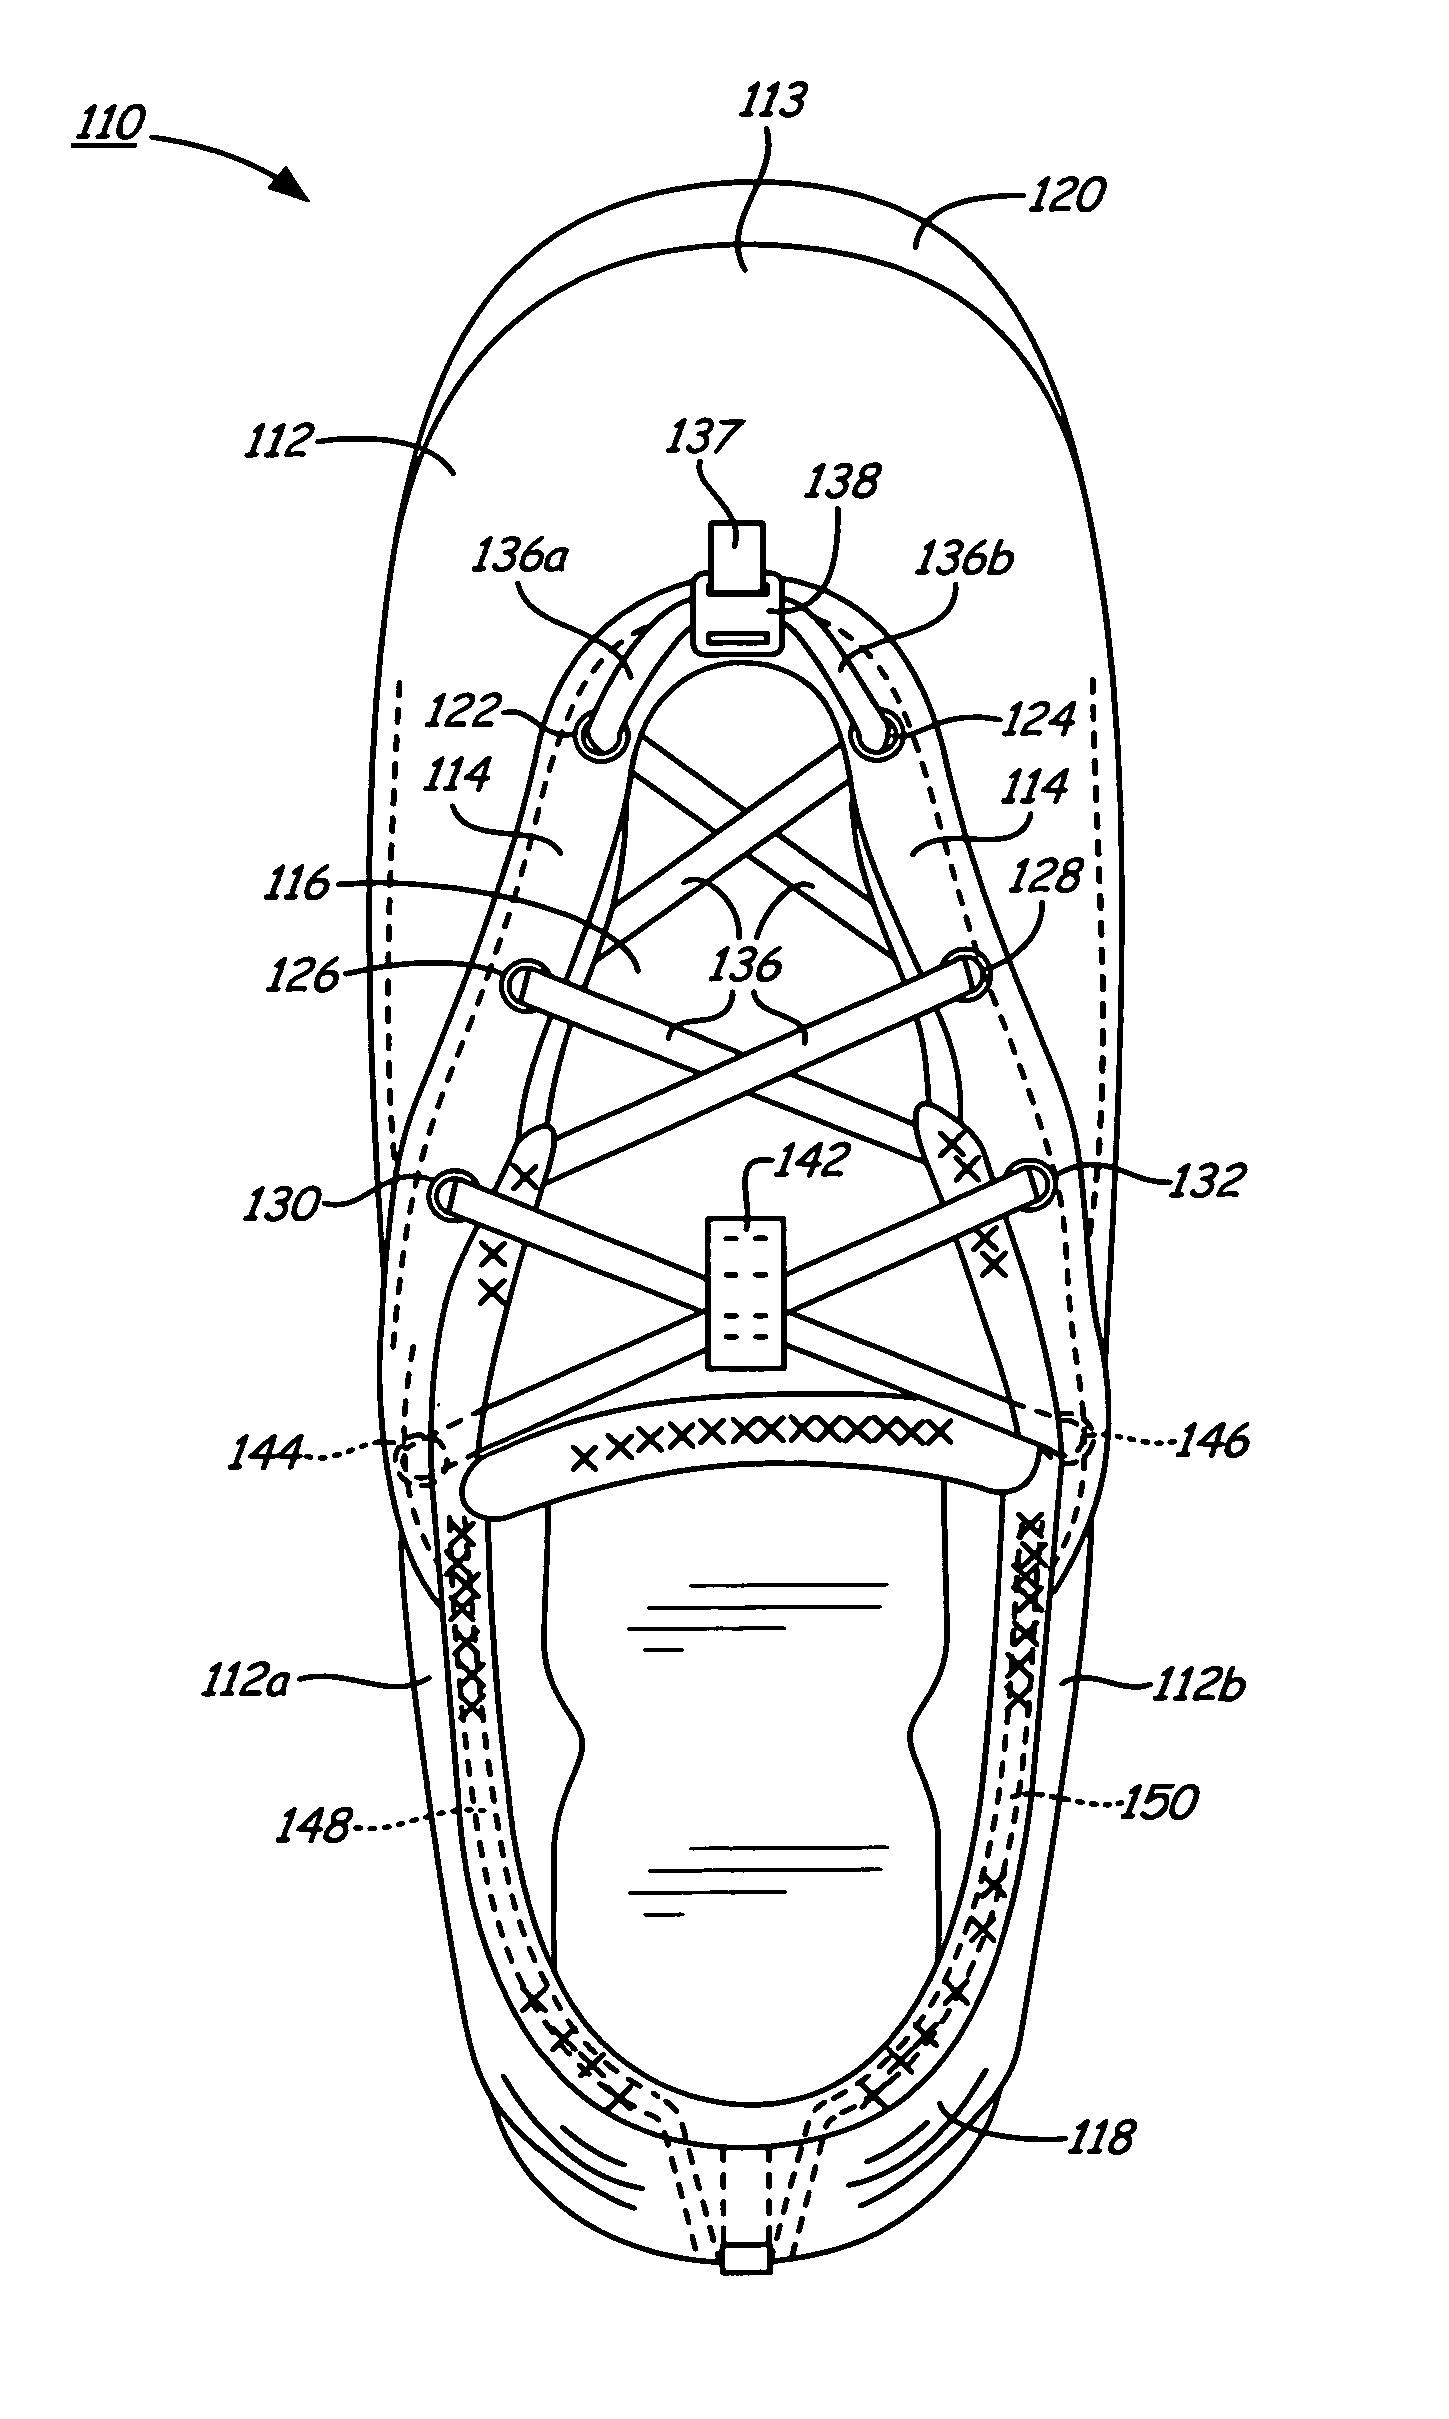 Automated tightening shoe